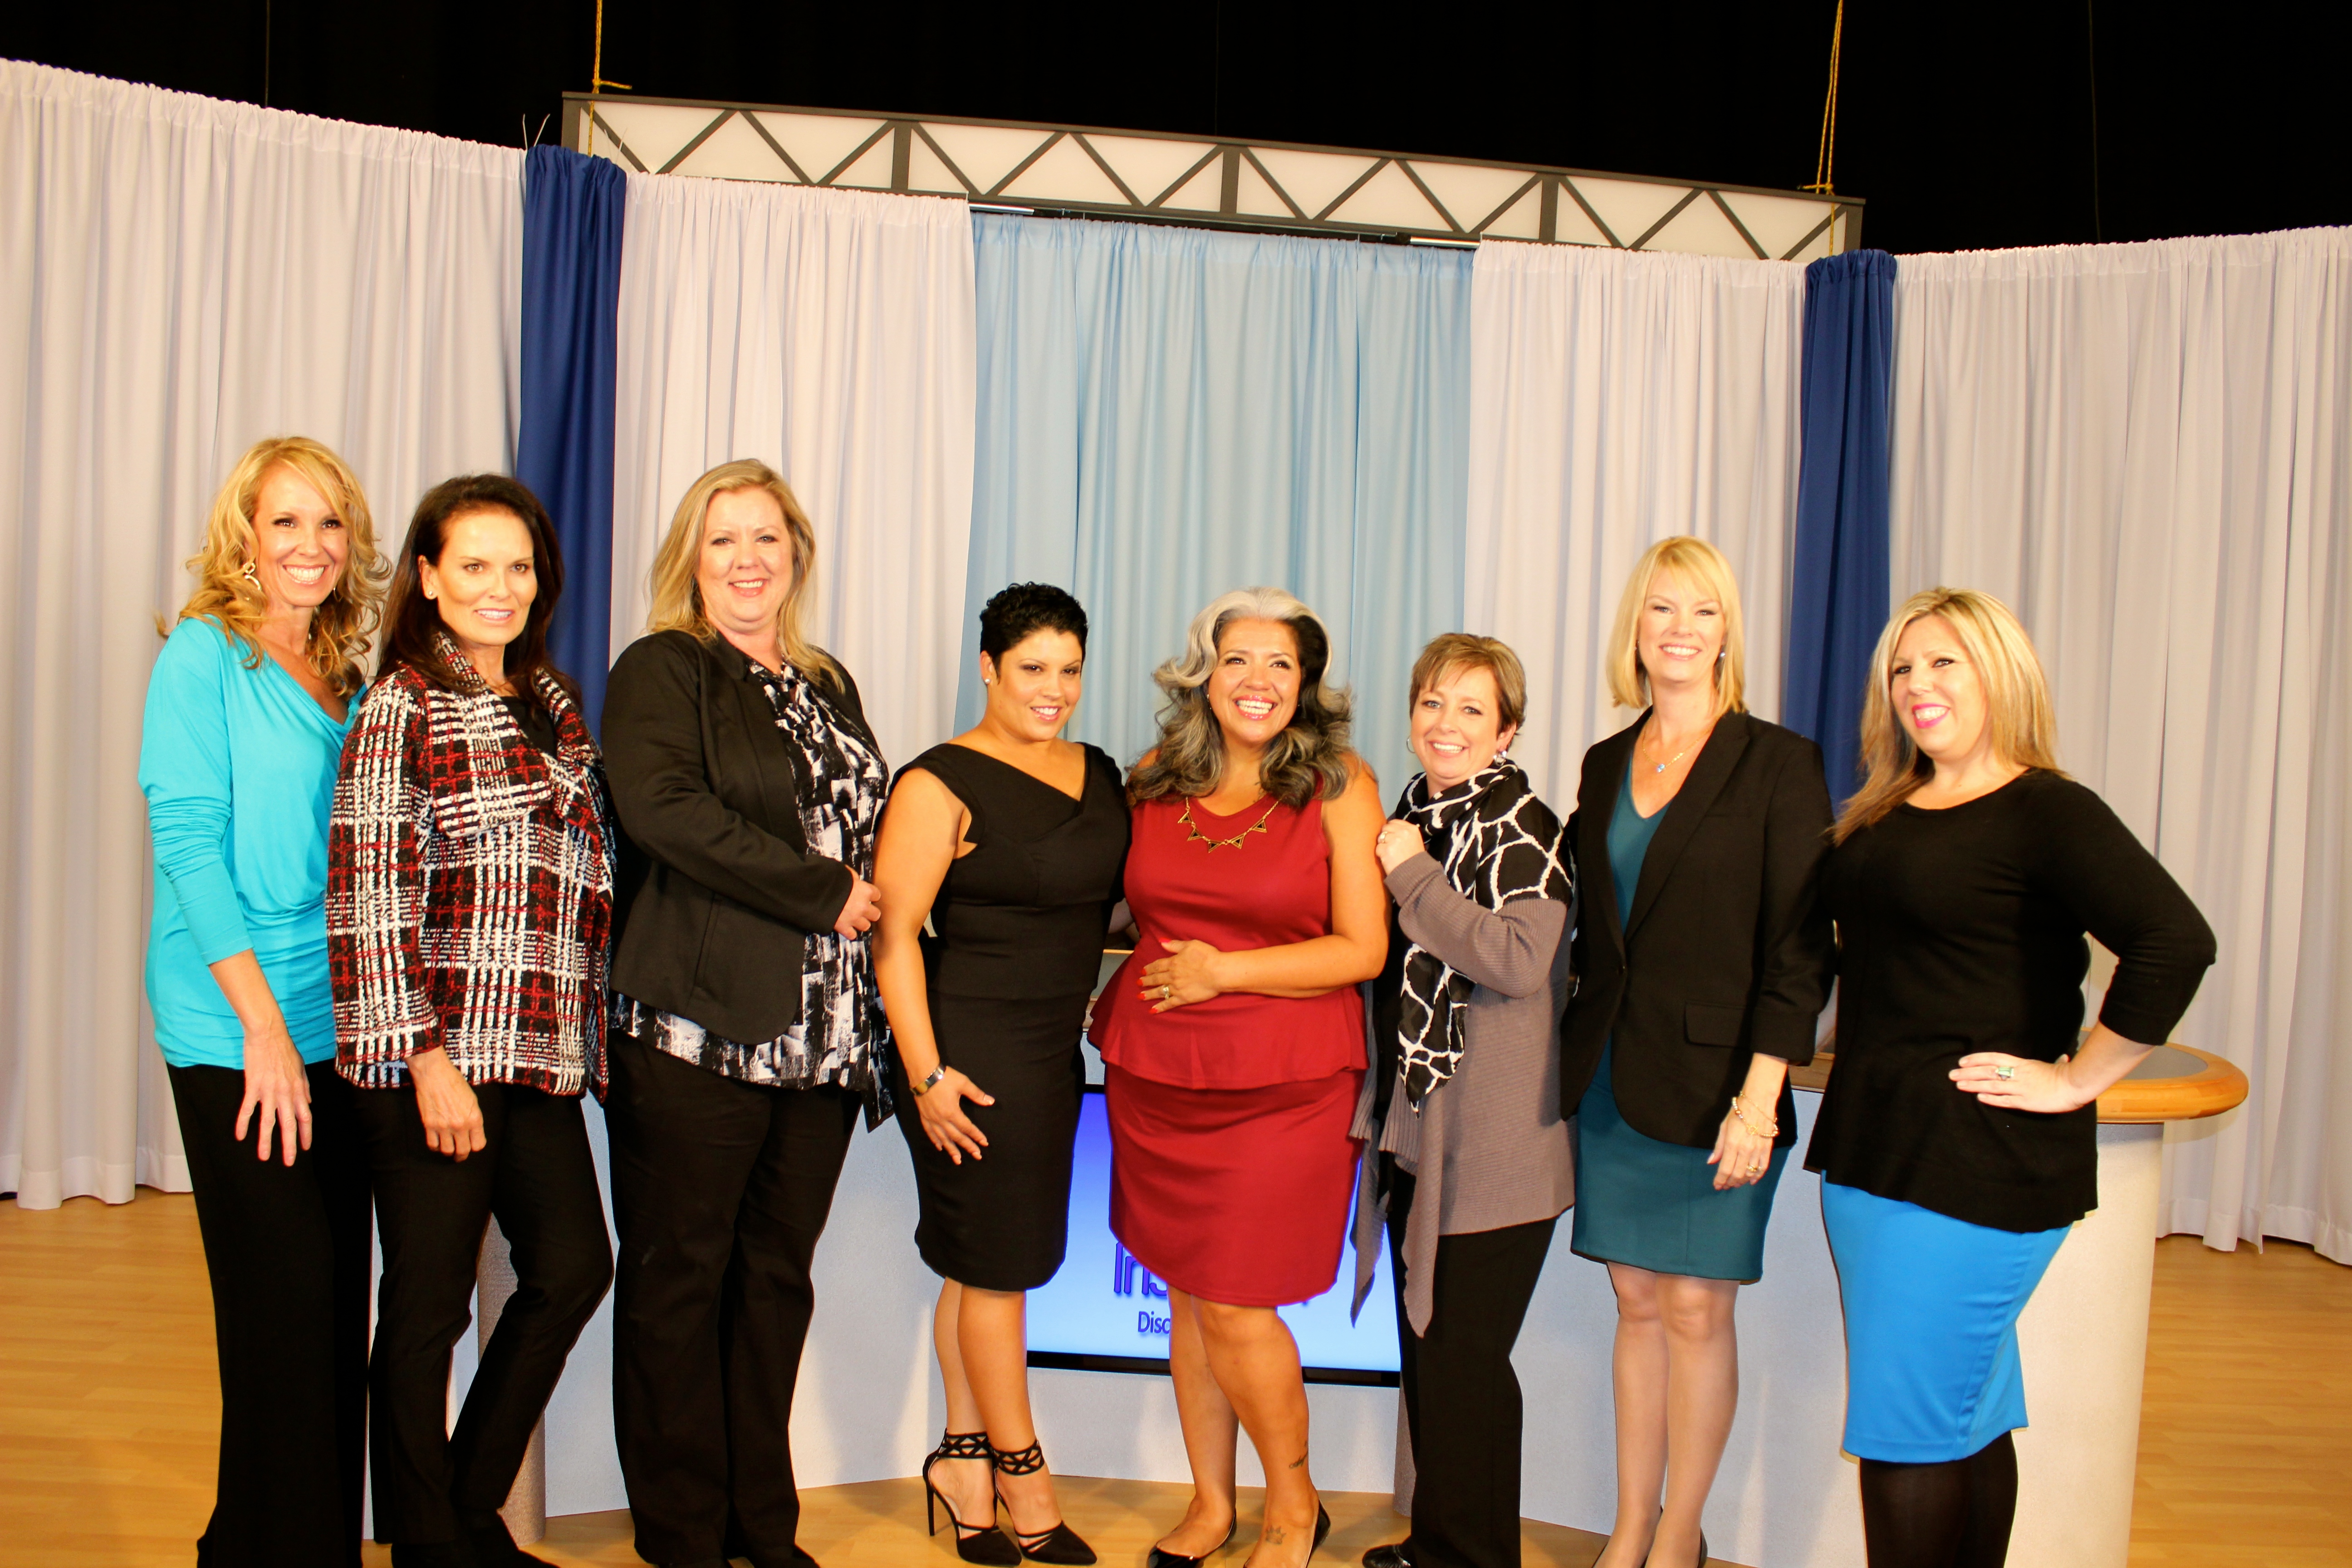 From left to right: Tanya Brown, Denise Brown Too, Danielle Pierre, Mia Styles, Sandra Vegas, Angie Cartwright, Lynda Cheldelin Fell, and MUA Amy Carratt on set at Orange County Sound Stage. Irvine, CA. Oct. 2014